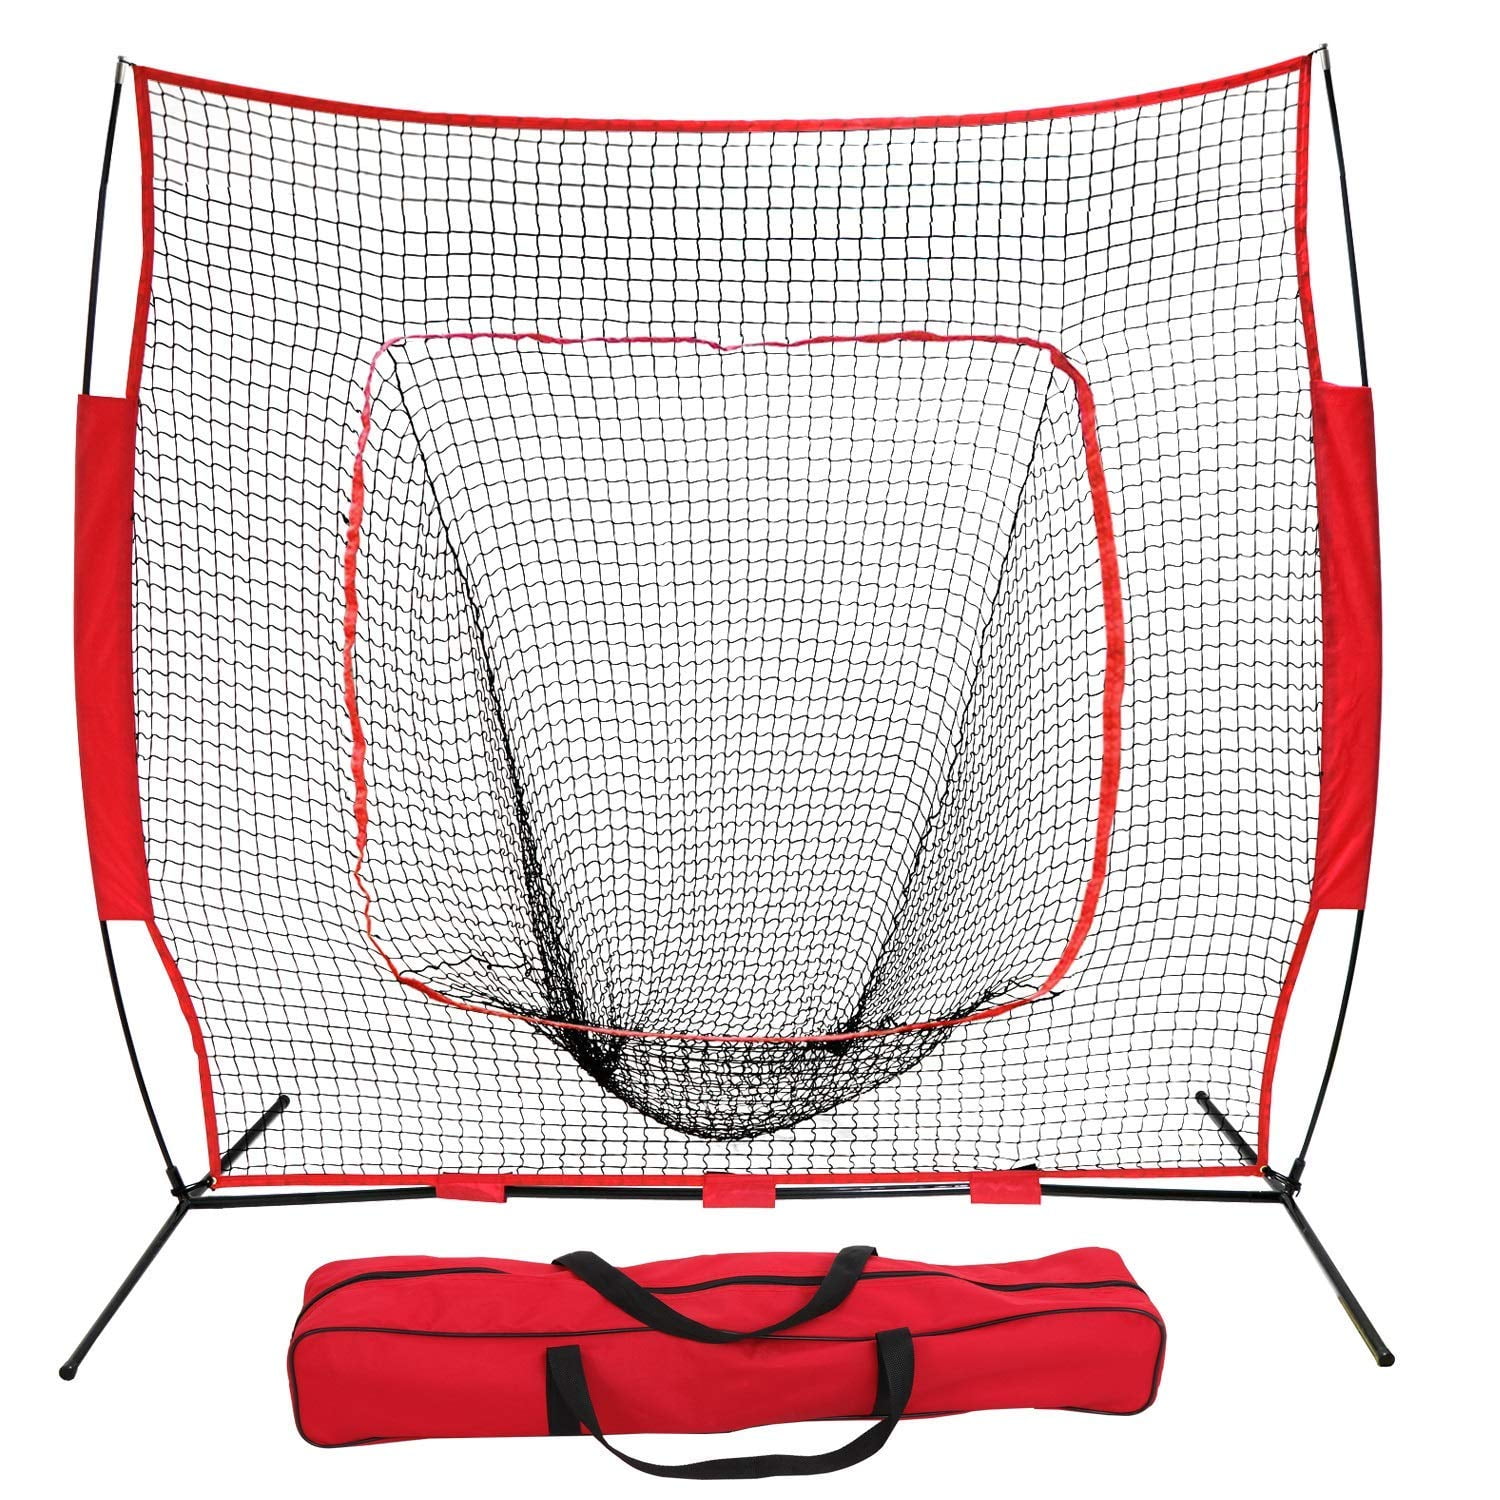 Yaheetech 7×7 Baseball Softball Practice Net with Metal Bow Frame and Carry Bag Hitting Batting Catching Pitching Training Net 